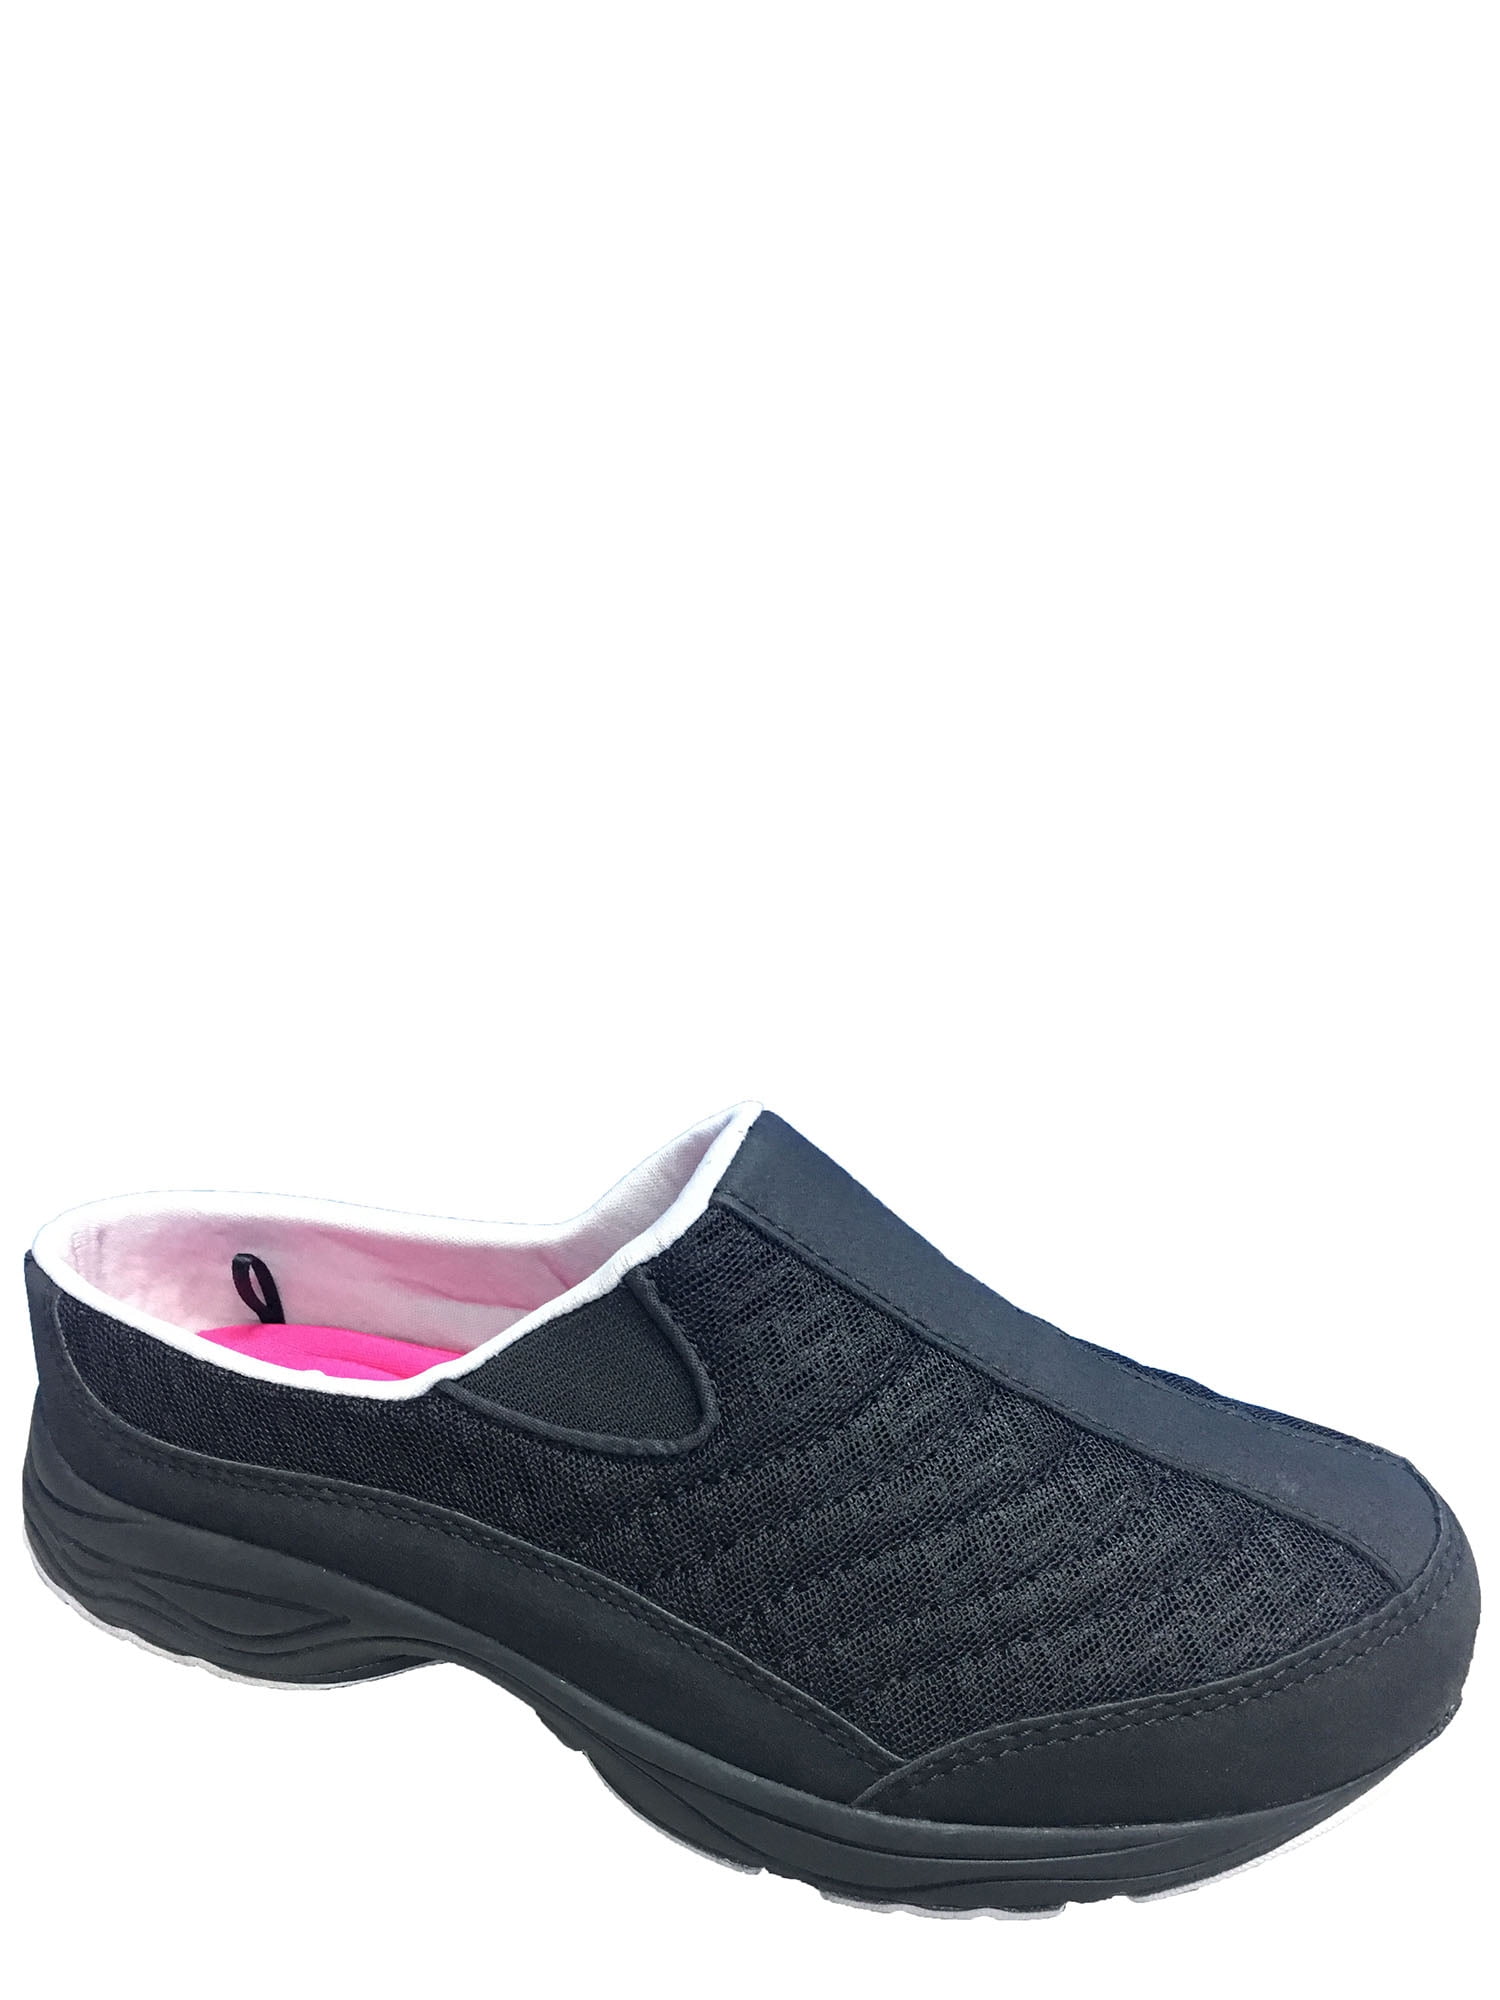 Athletic Works - Athletic Works Women's Essential Slip On Athletic Shoe ...